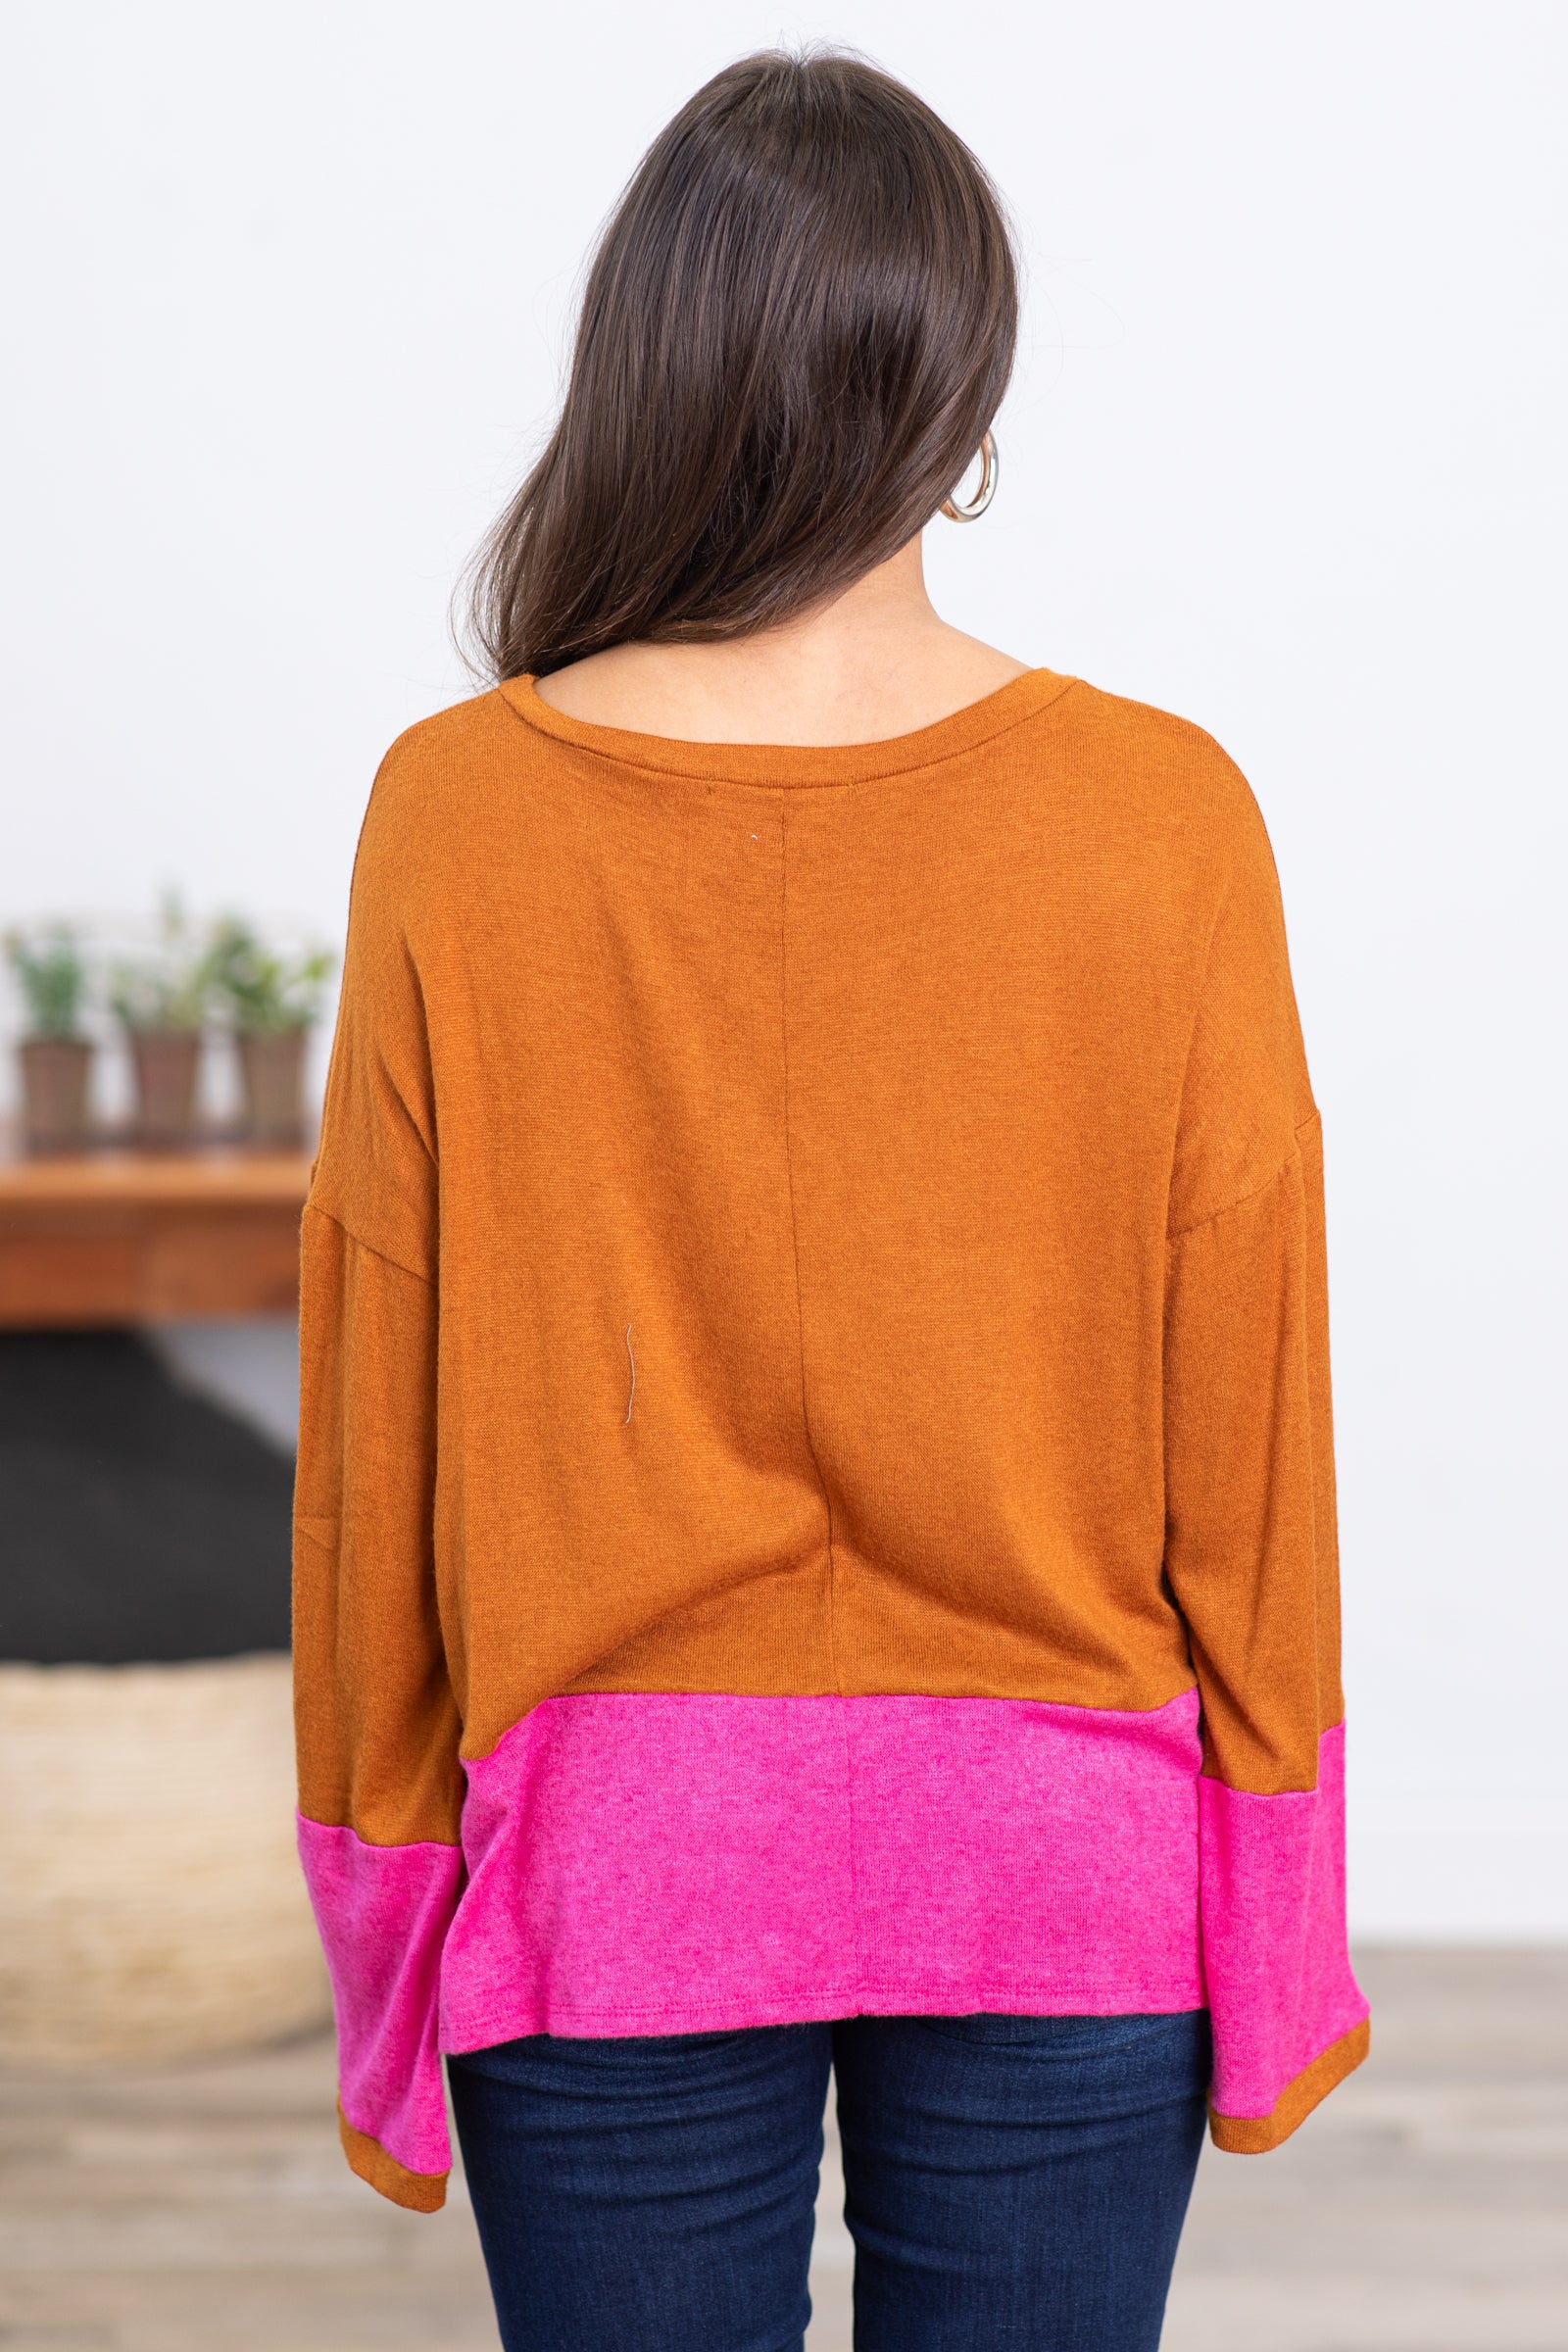 Cognac and Hot Pink Colorblock Bell Sleeve Top